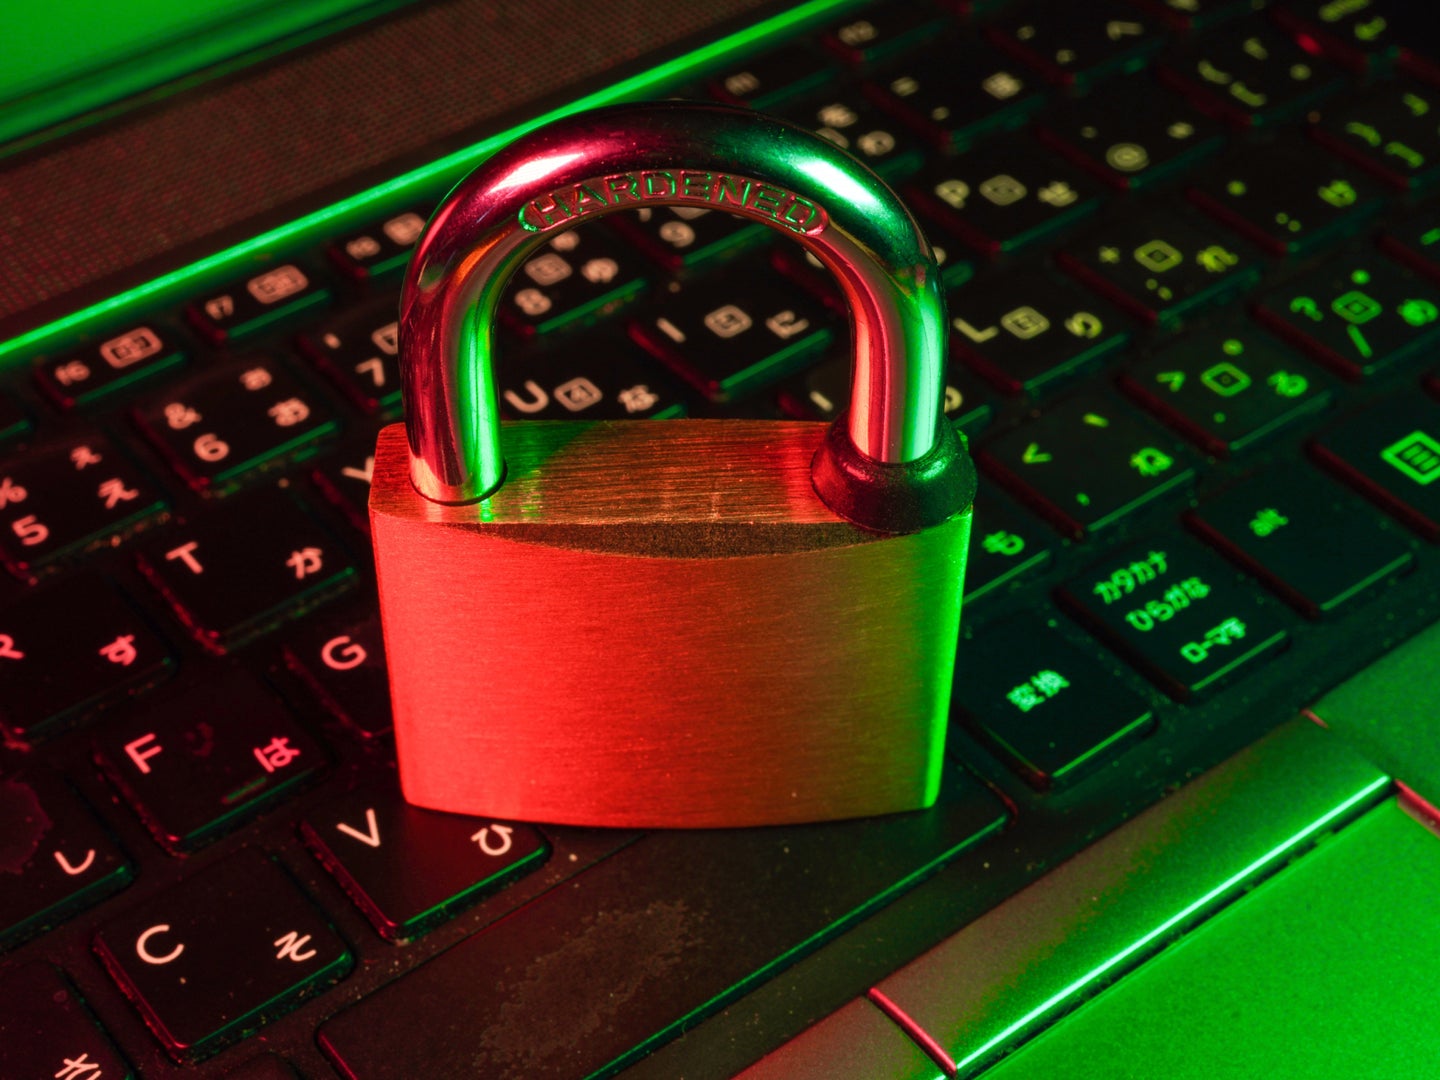 A large padlock sitting on a computer keyboard under some green and red lighting.